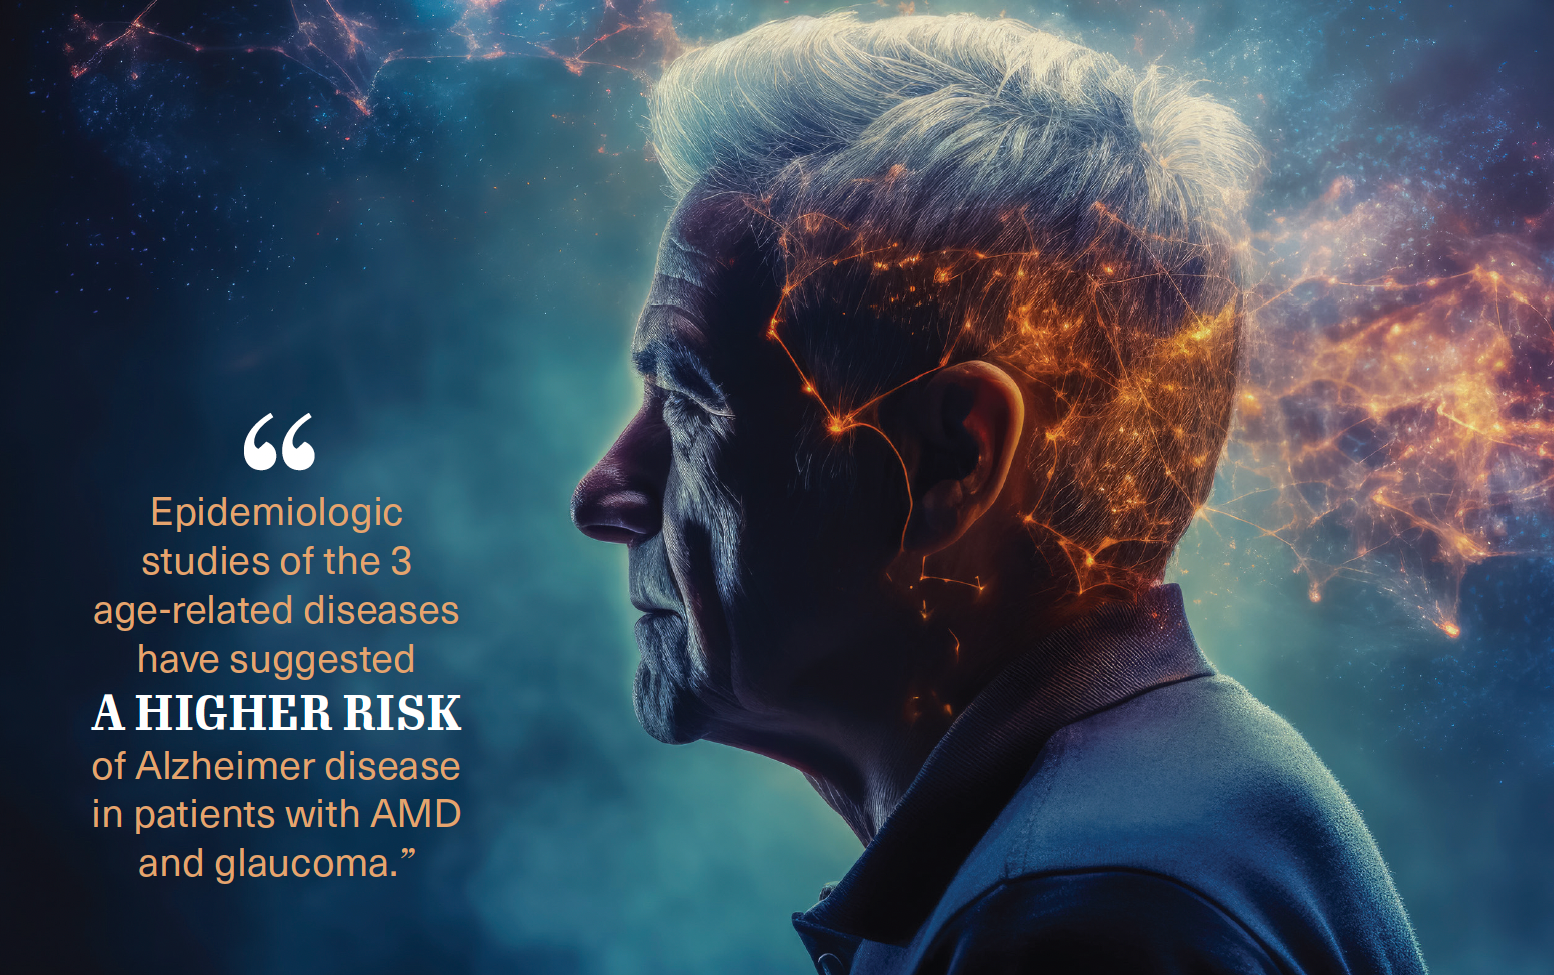 Quote on background: "Epidemiologic studies of the 3 age-related diseases have suggested a higher risk of Alzheimer disease in patients with AMD and glaucoma." An illustration made with AI shows a man with digital imagery overlaid over his head. Image credit: ©fotogurmespb – stock.adobe.com